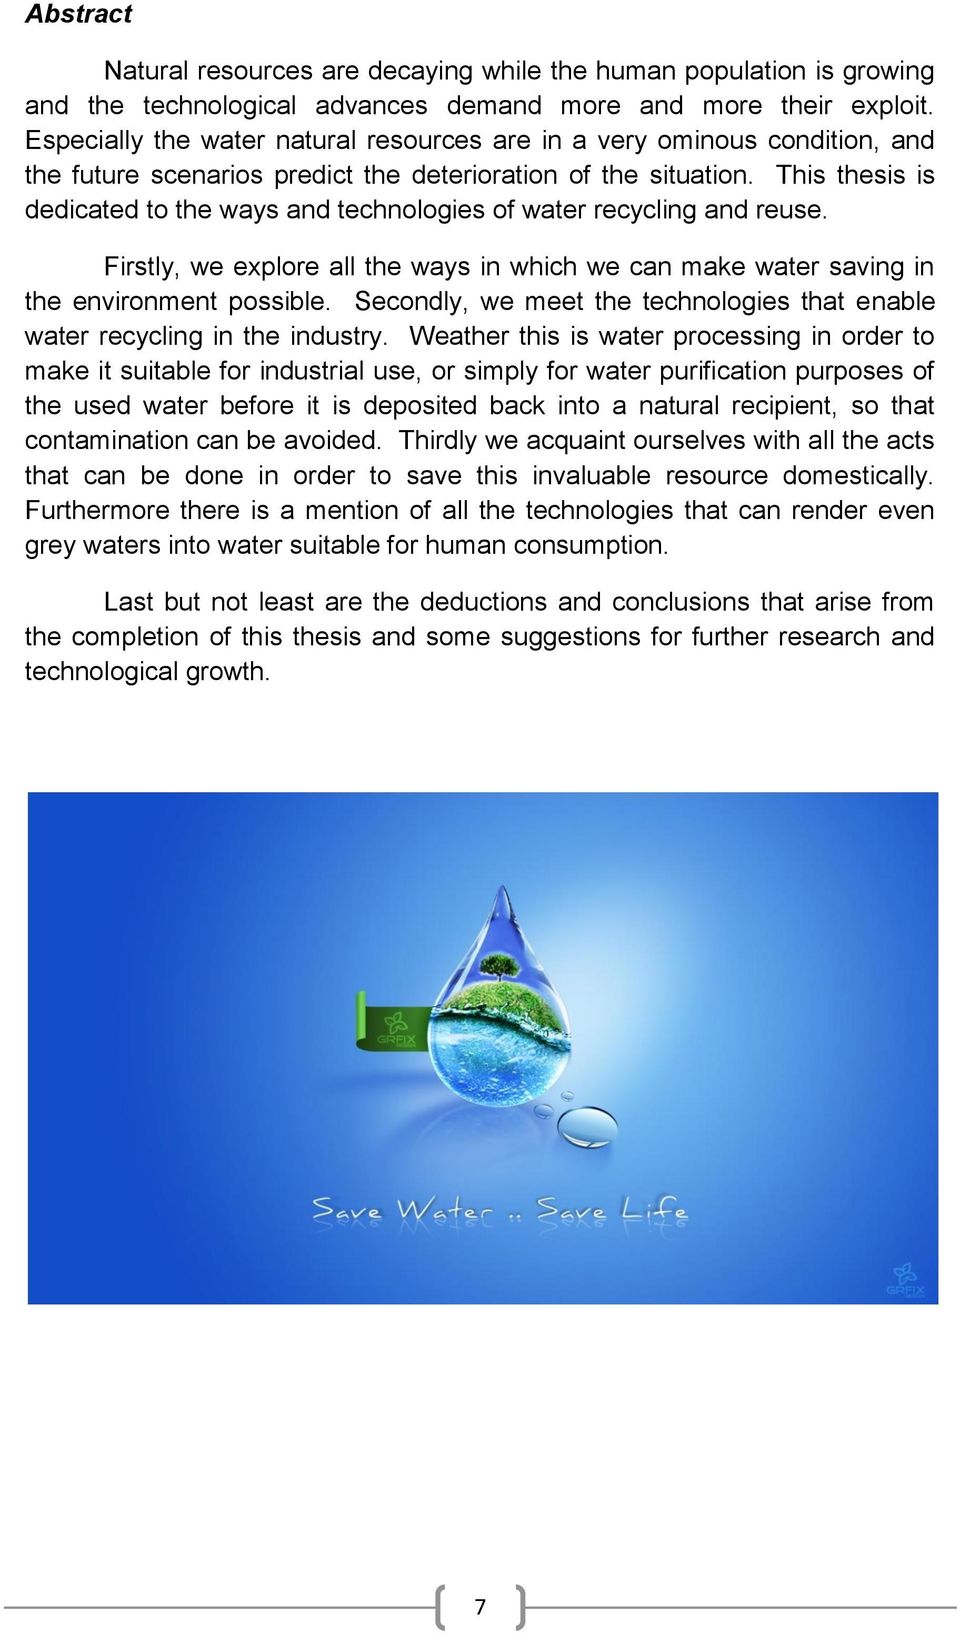 This thesis is dedicated to the ways and technologies of water recycling and reuse. Firstly, we explore all the ways in which we can make water saving in the environment possible.